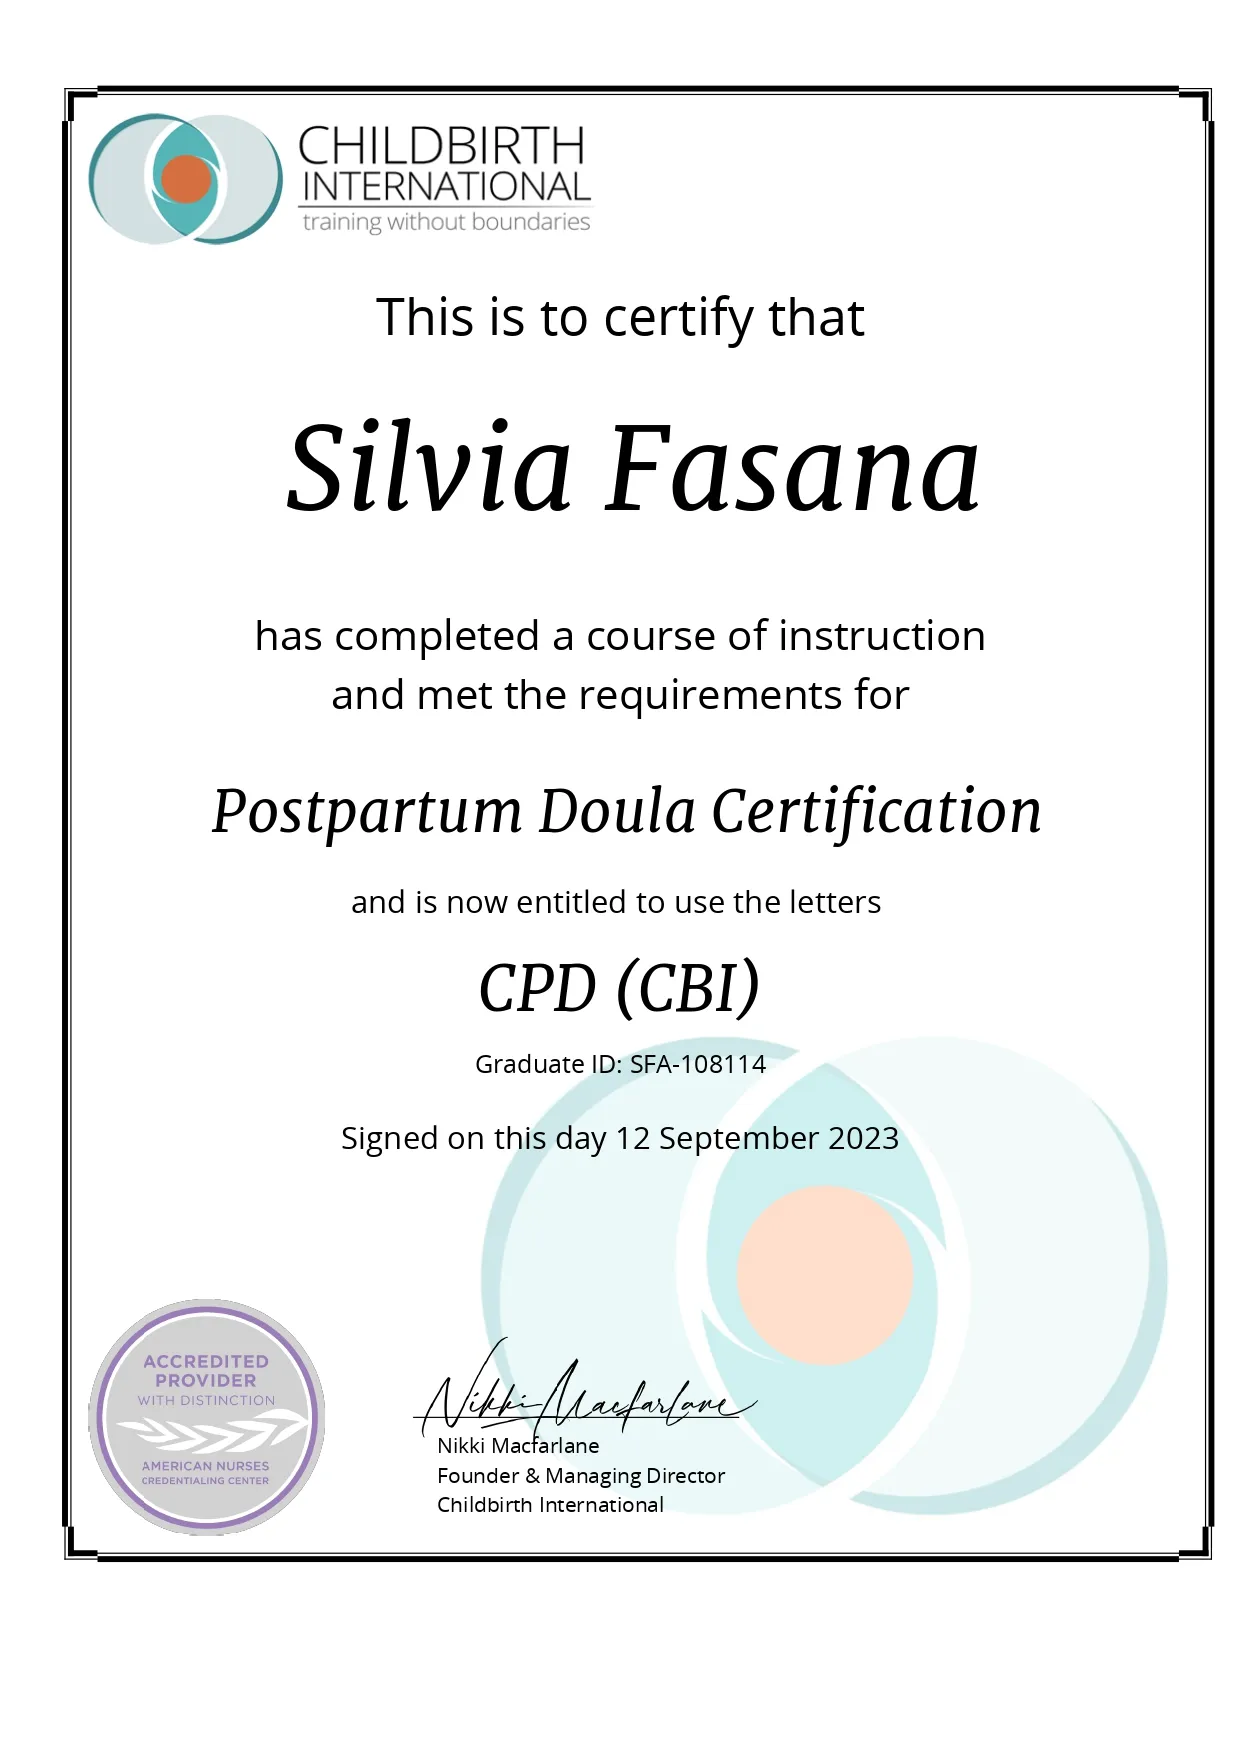 Silvia's certification on post partum doula services.